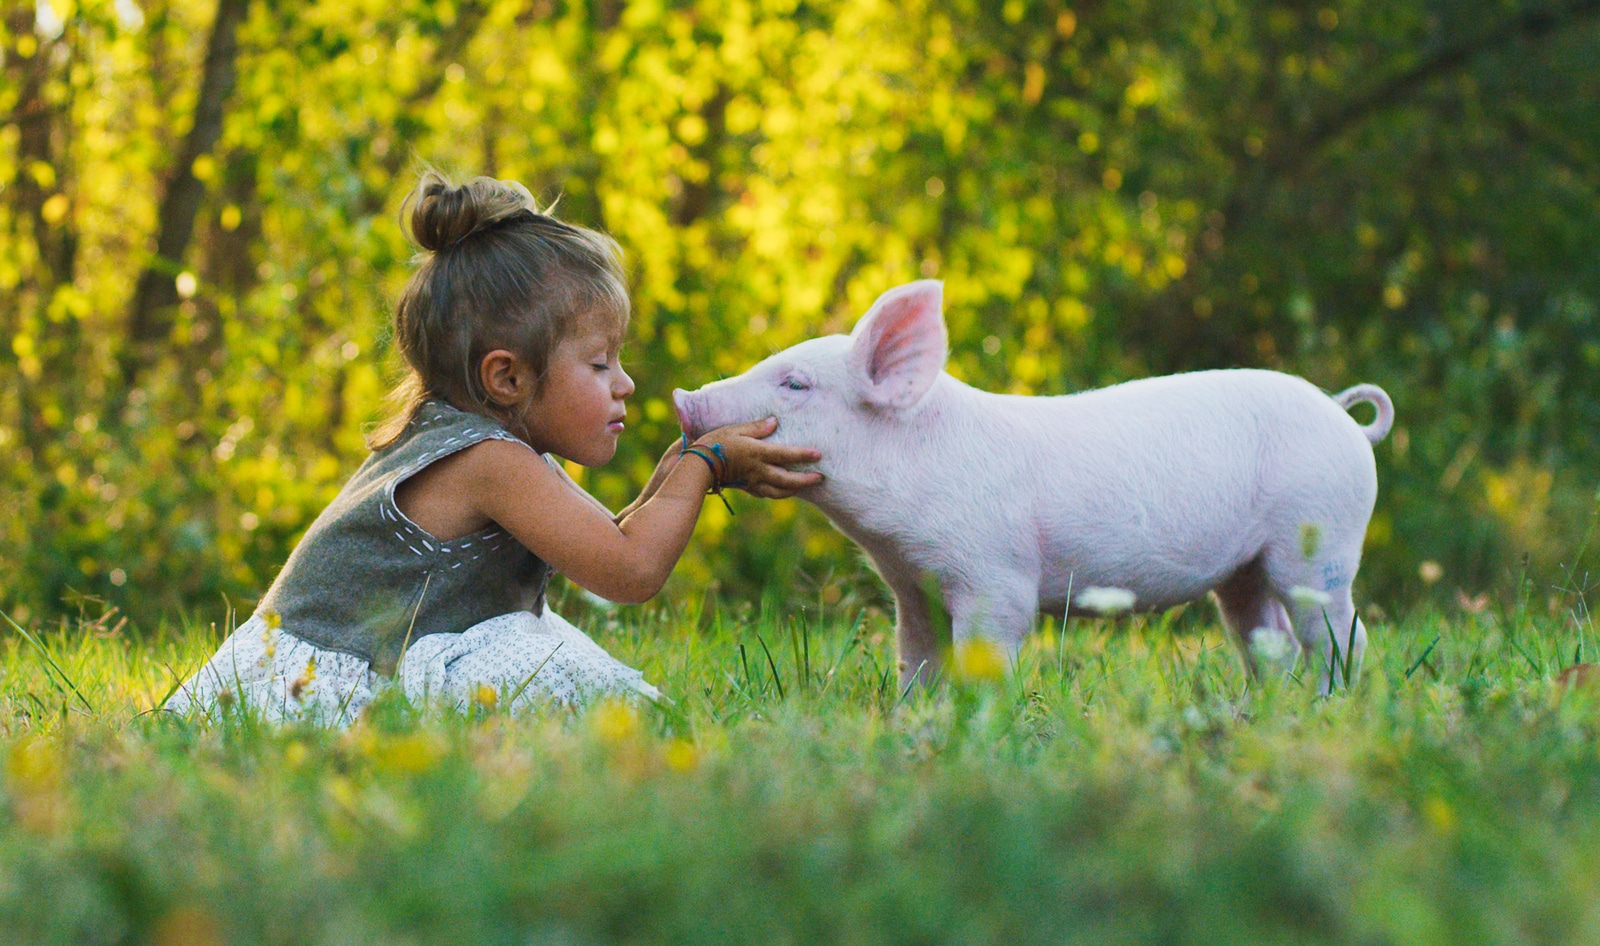 Until Age 11, Children Less Likely Than Adults to See Animals as Food, Study Finds